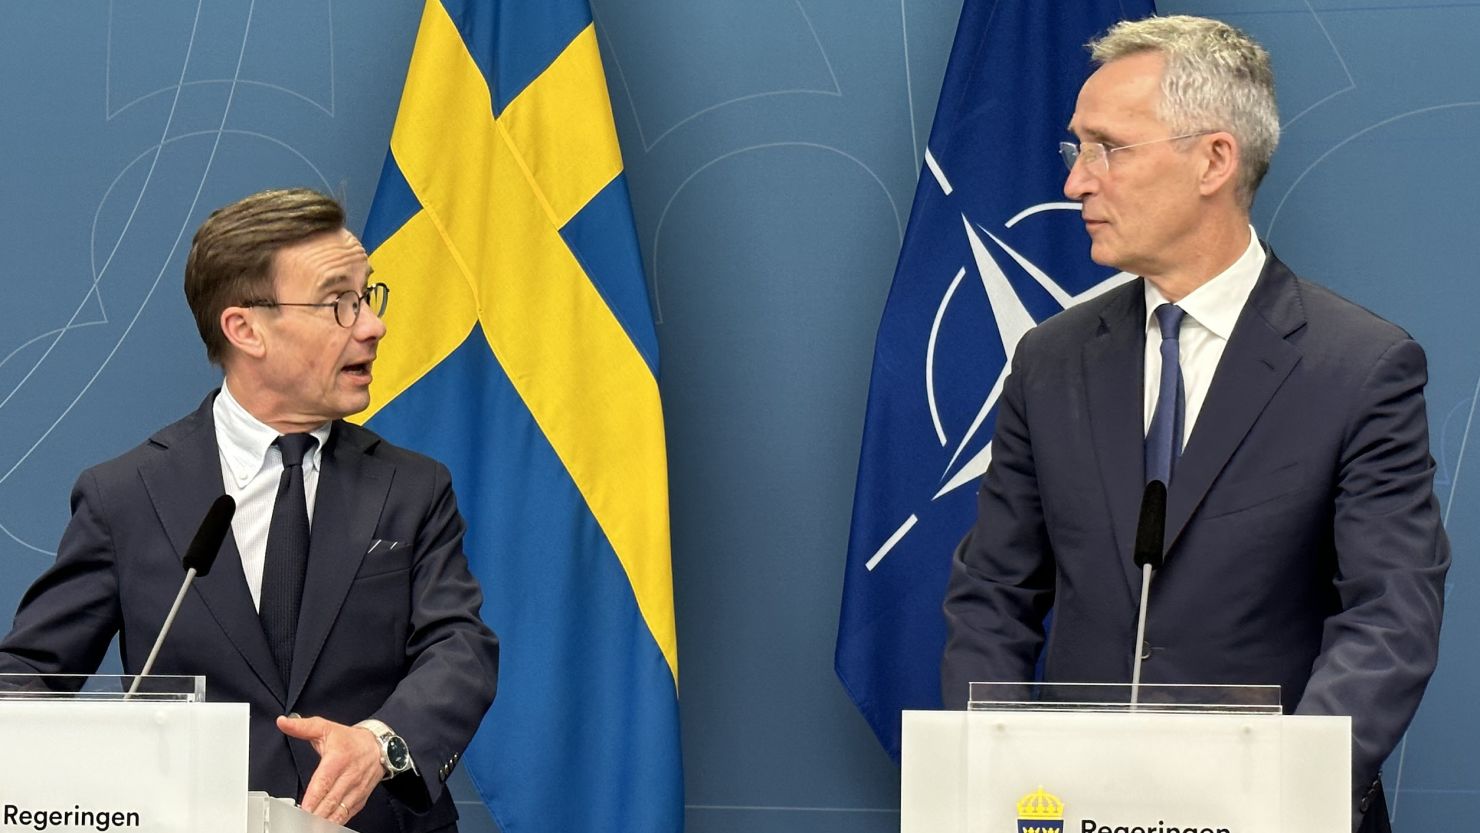 Swedish PM Ulf Kristersson (left) and NATO Secretary-General Jens Stoltenberg hold a press conference in Stockholm on March 07, 2023. The decision to allow a mosque-burning protest may threaten Sweden's chances of joining NATO, due to objections from Turkey.